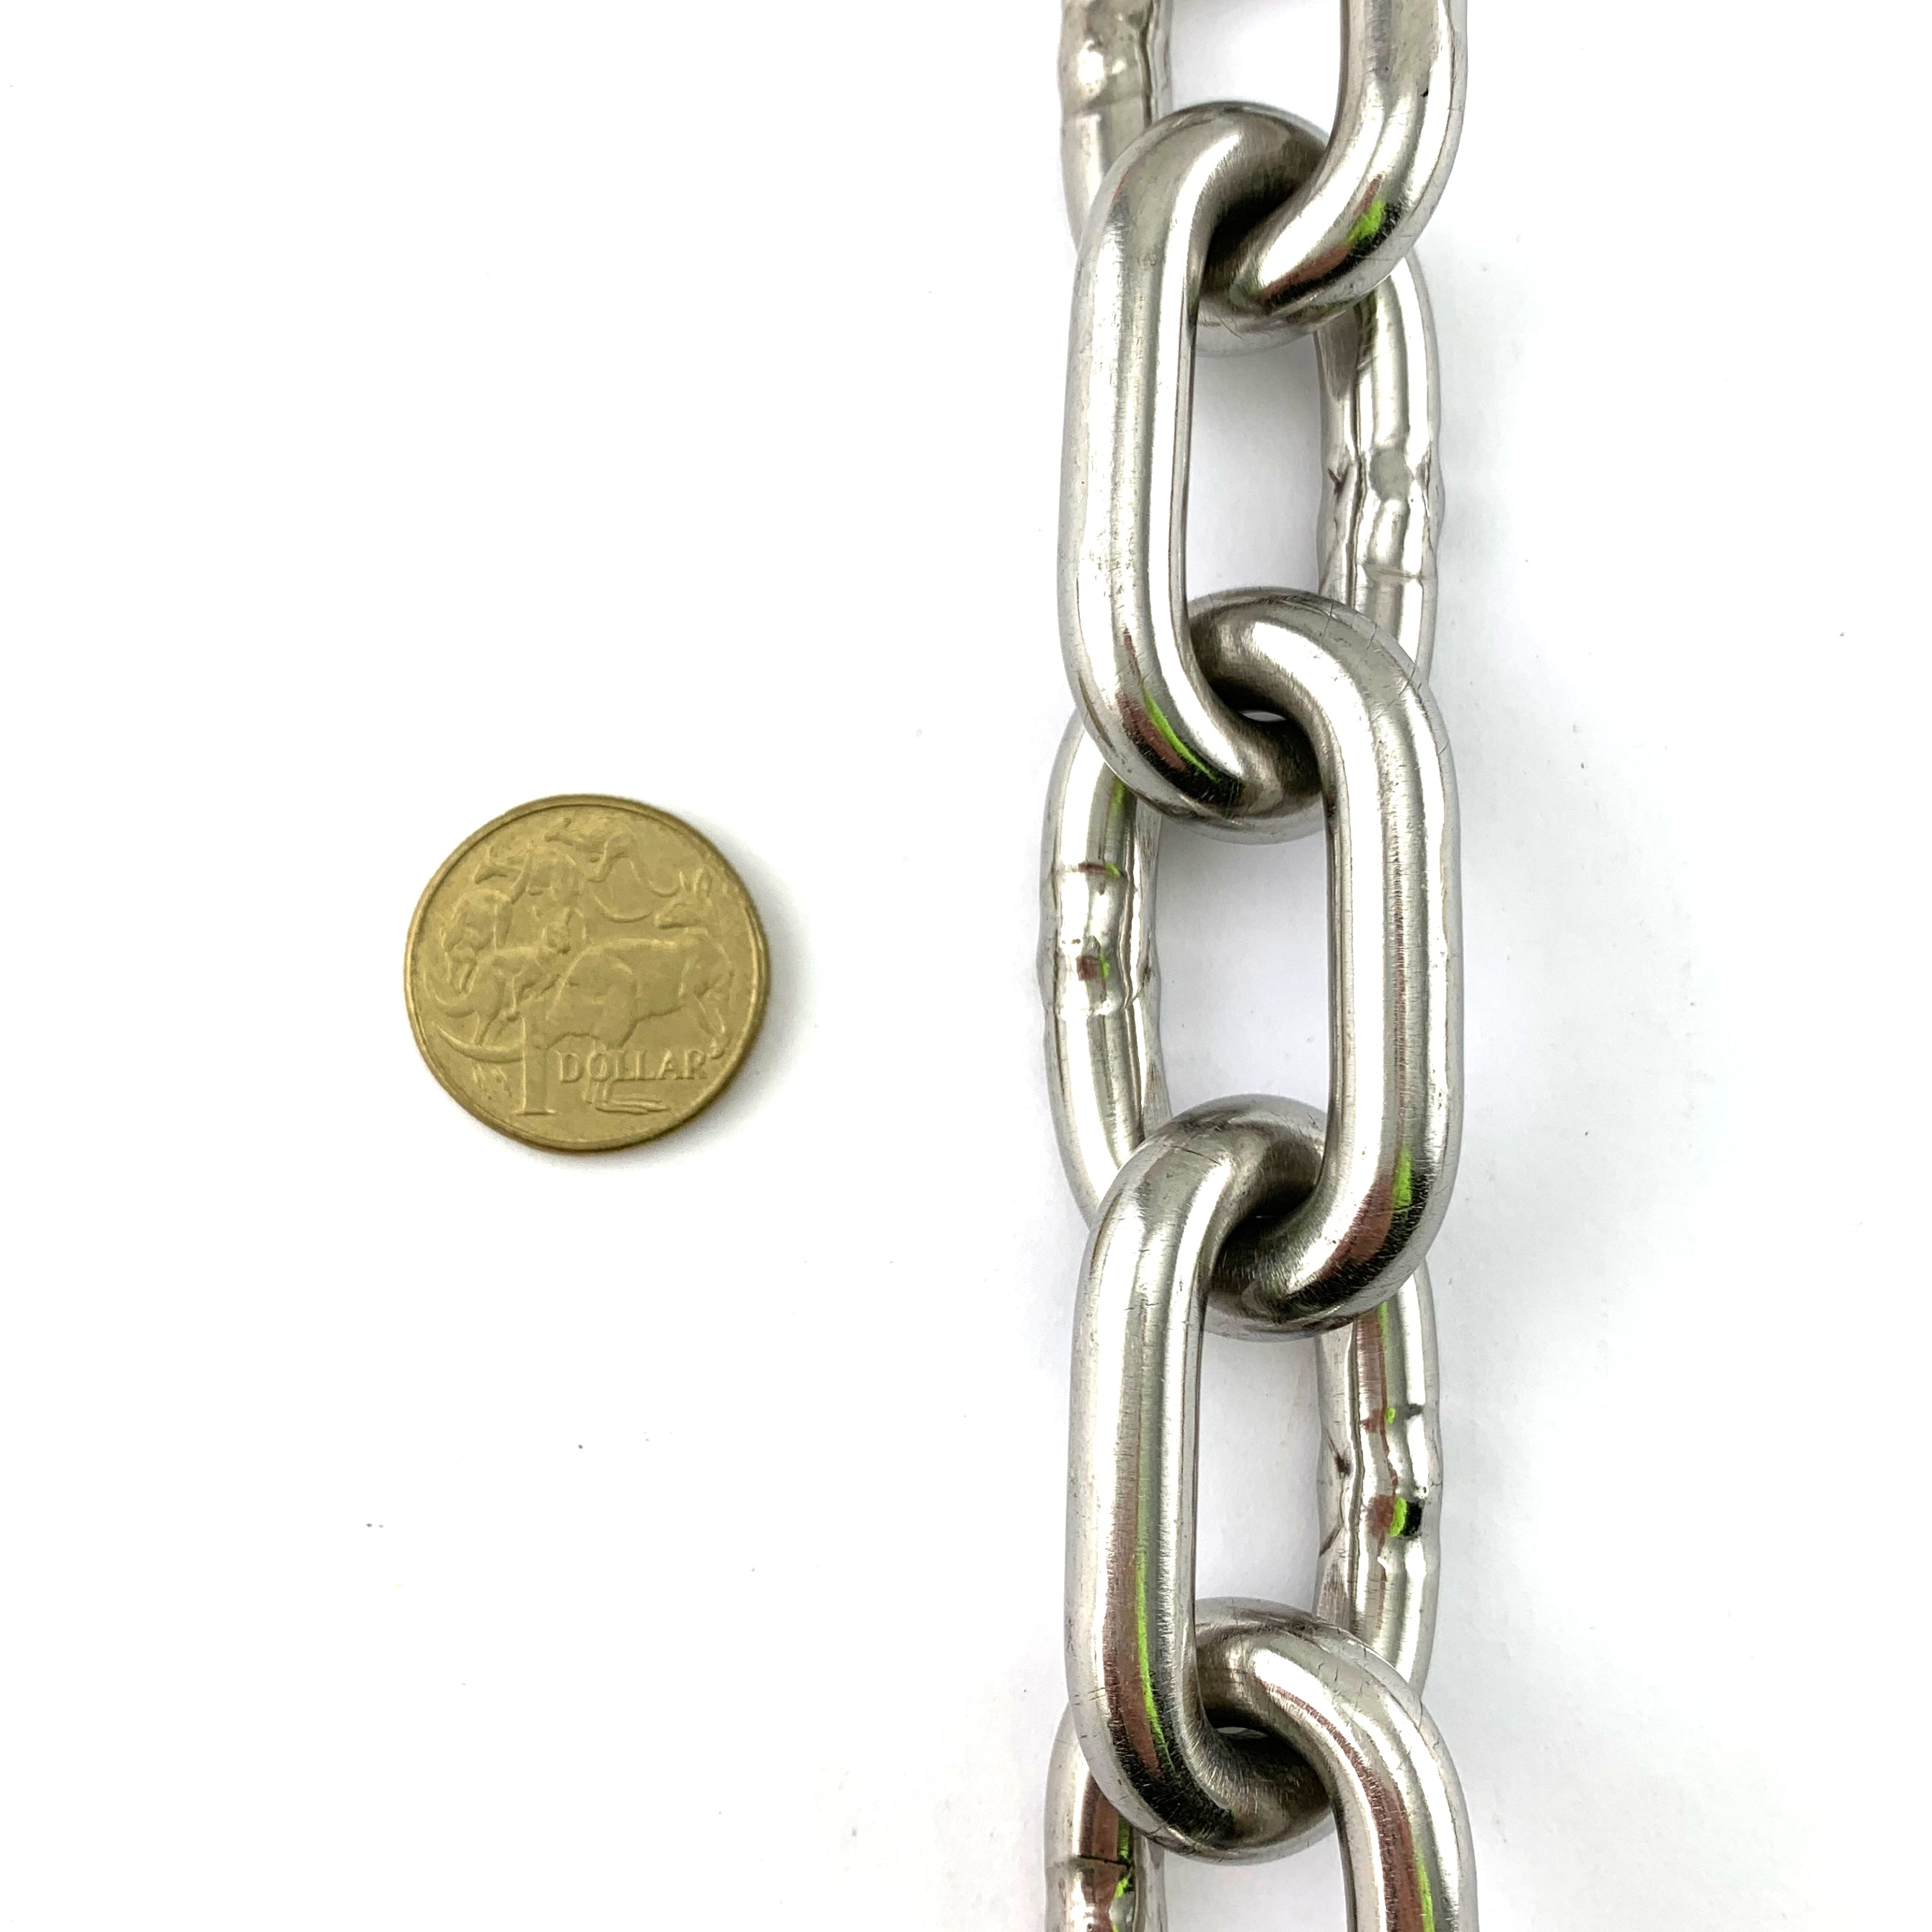 8mm stainless steel welded link chain in a 25kg bucket, with 19 metres of chain. Melbourne Australia